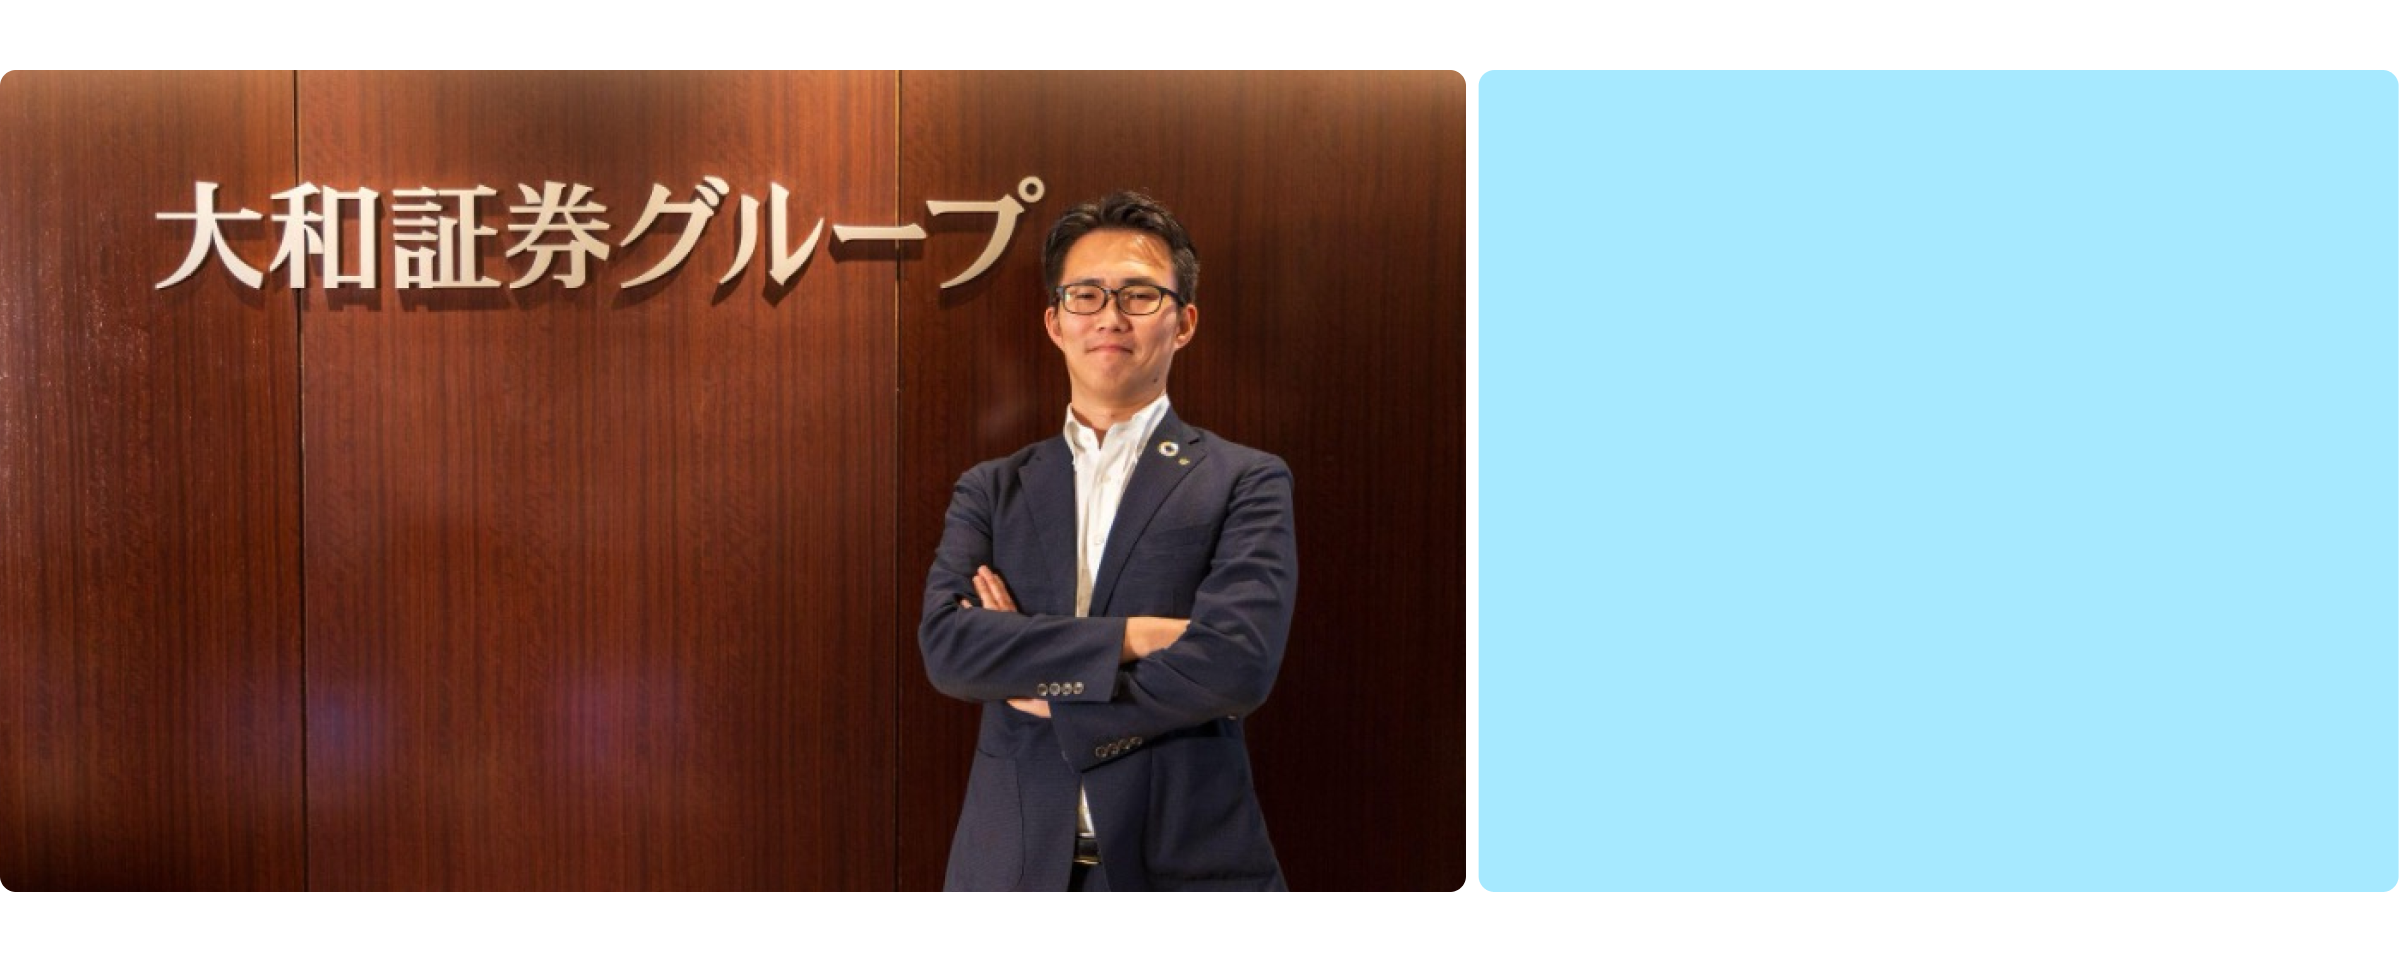 Photograph of Kazuki Hiroshima in front of a logo on a wall